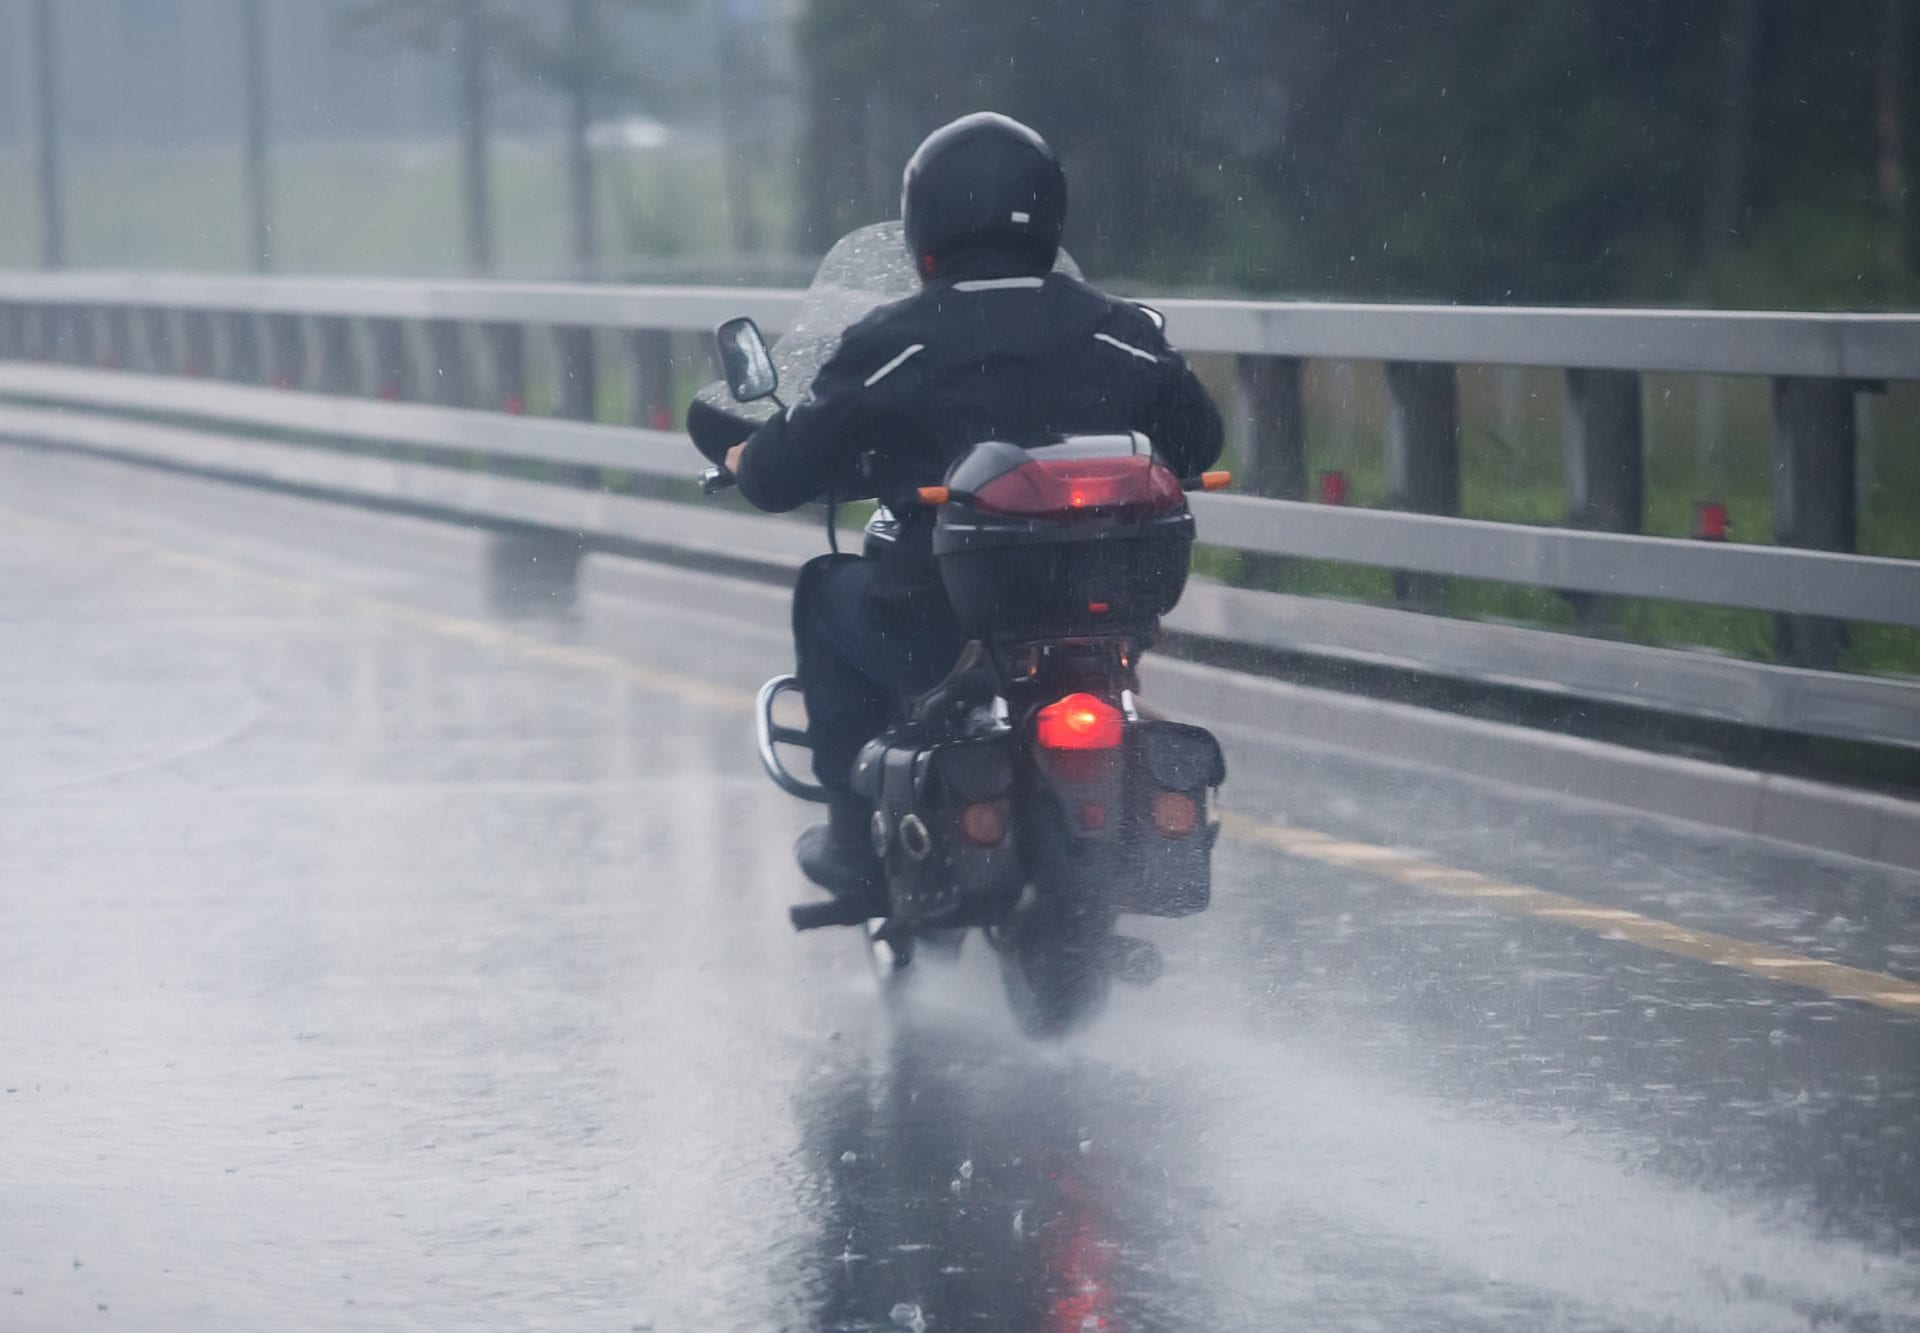 1683256282_Riding-a-Motorcycle-in-the-Rain-1-scaled.jpg